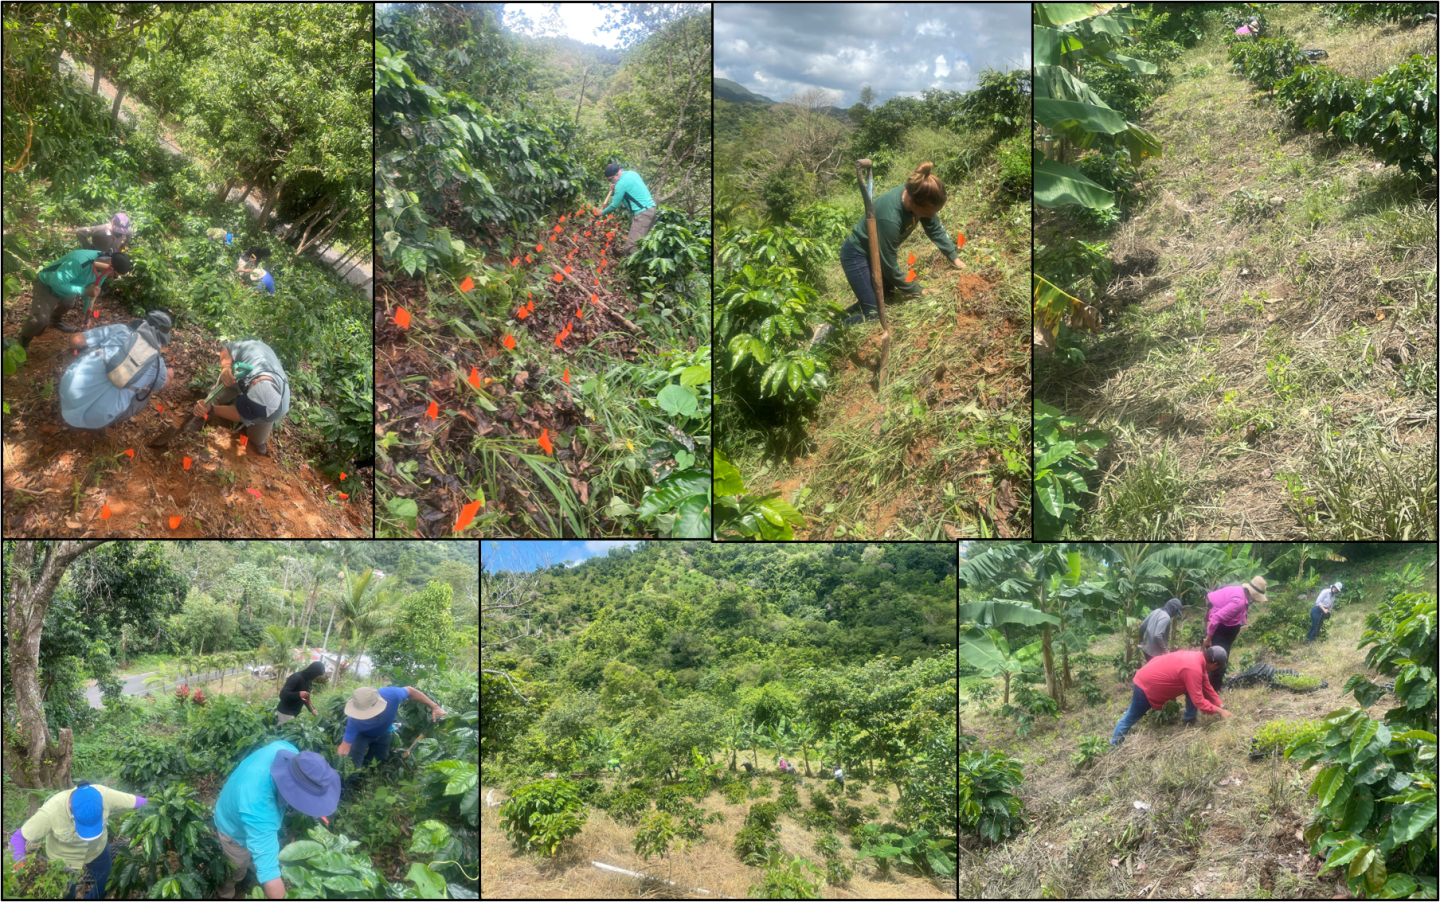 Planting Arachis pintoi conservation covers farm trials in Jayuya, PR, on 25 June 2021.